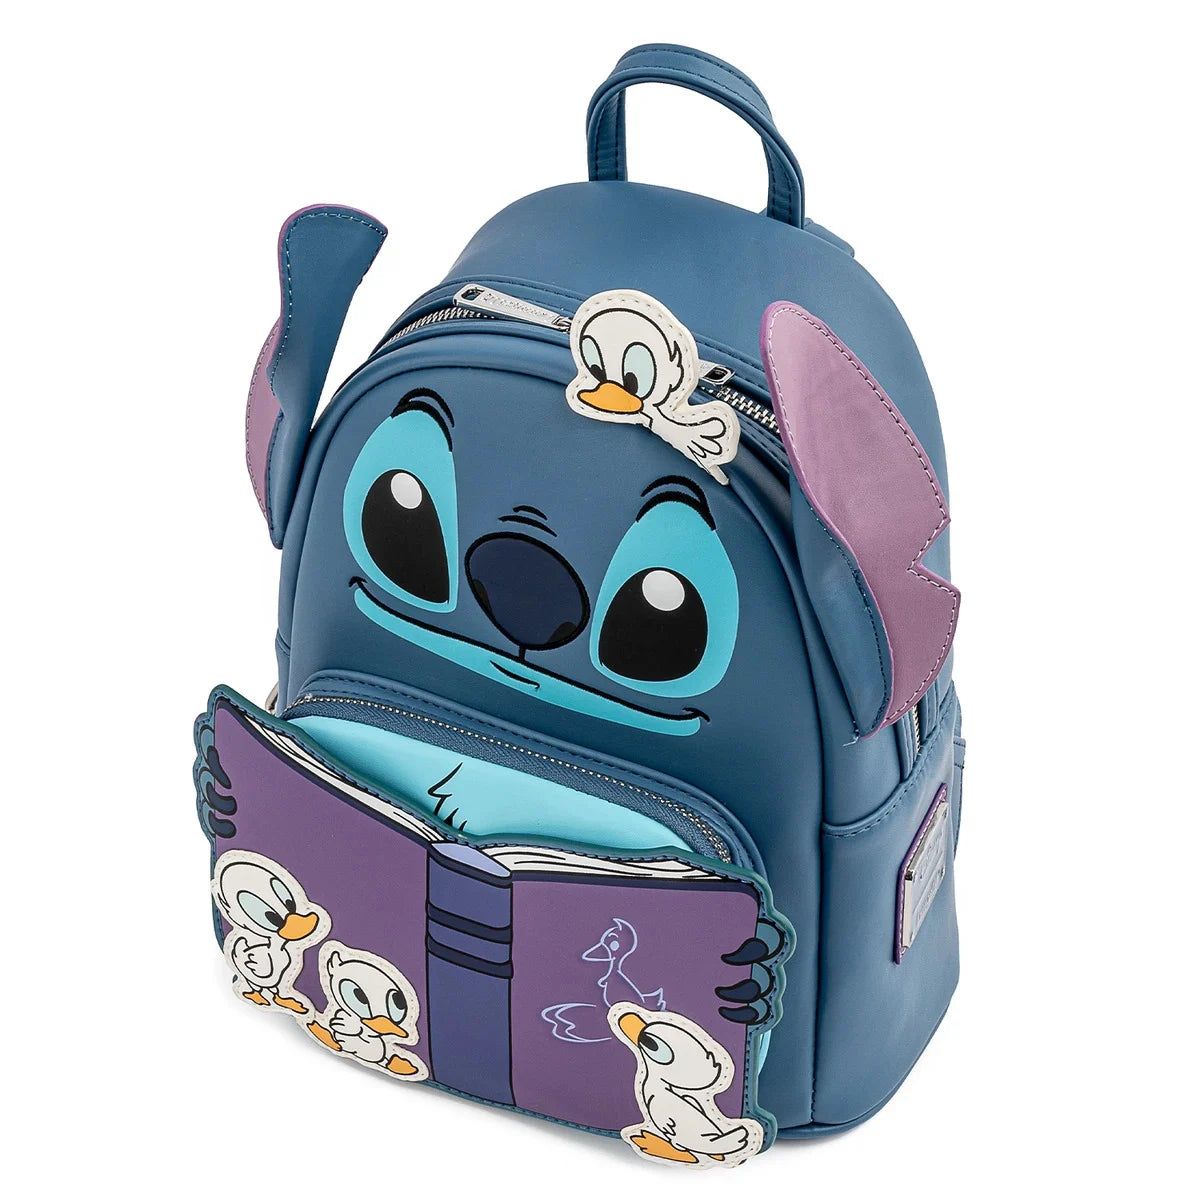 Lilo and Stitch backpack - Stitch Story Time Duckies - Precommand*